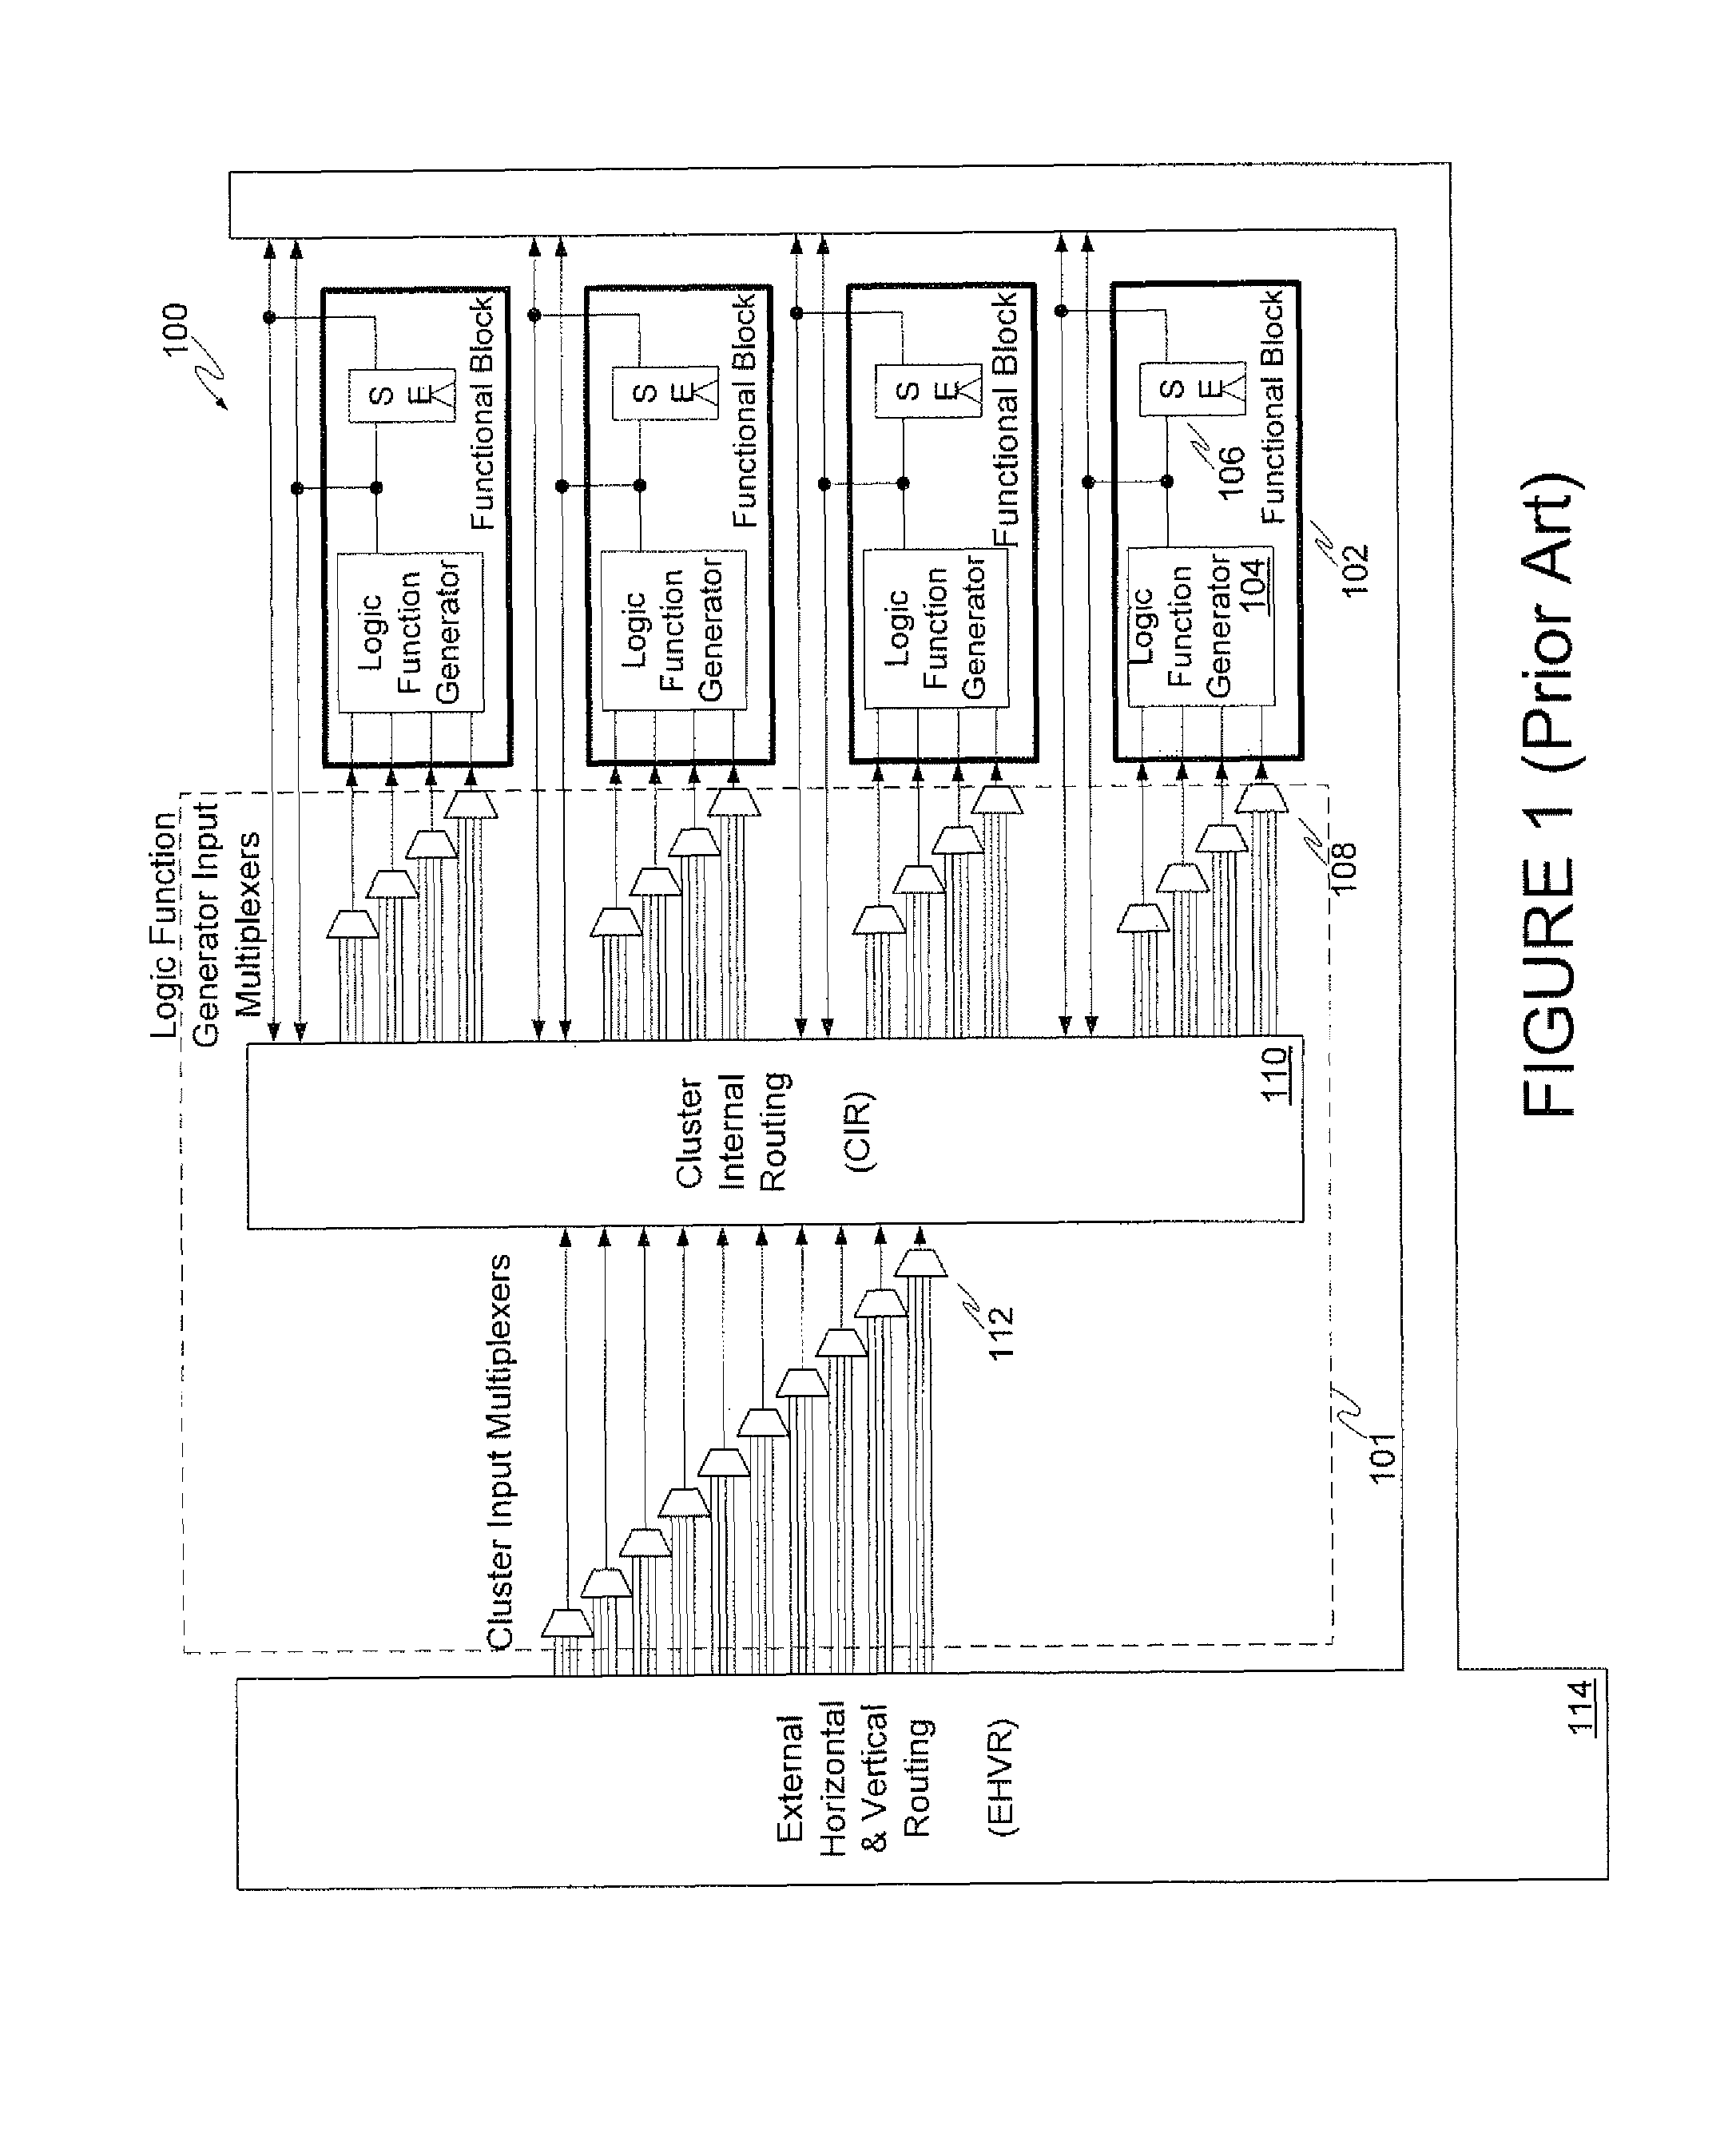 Field programmable gate array architecture having Clos network-based input interconnect